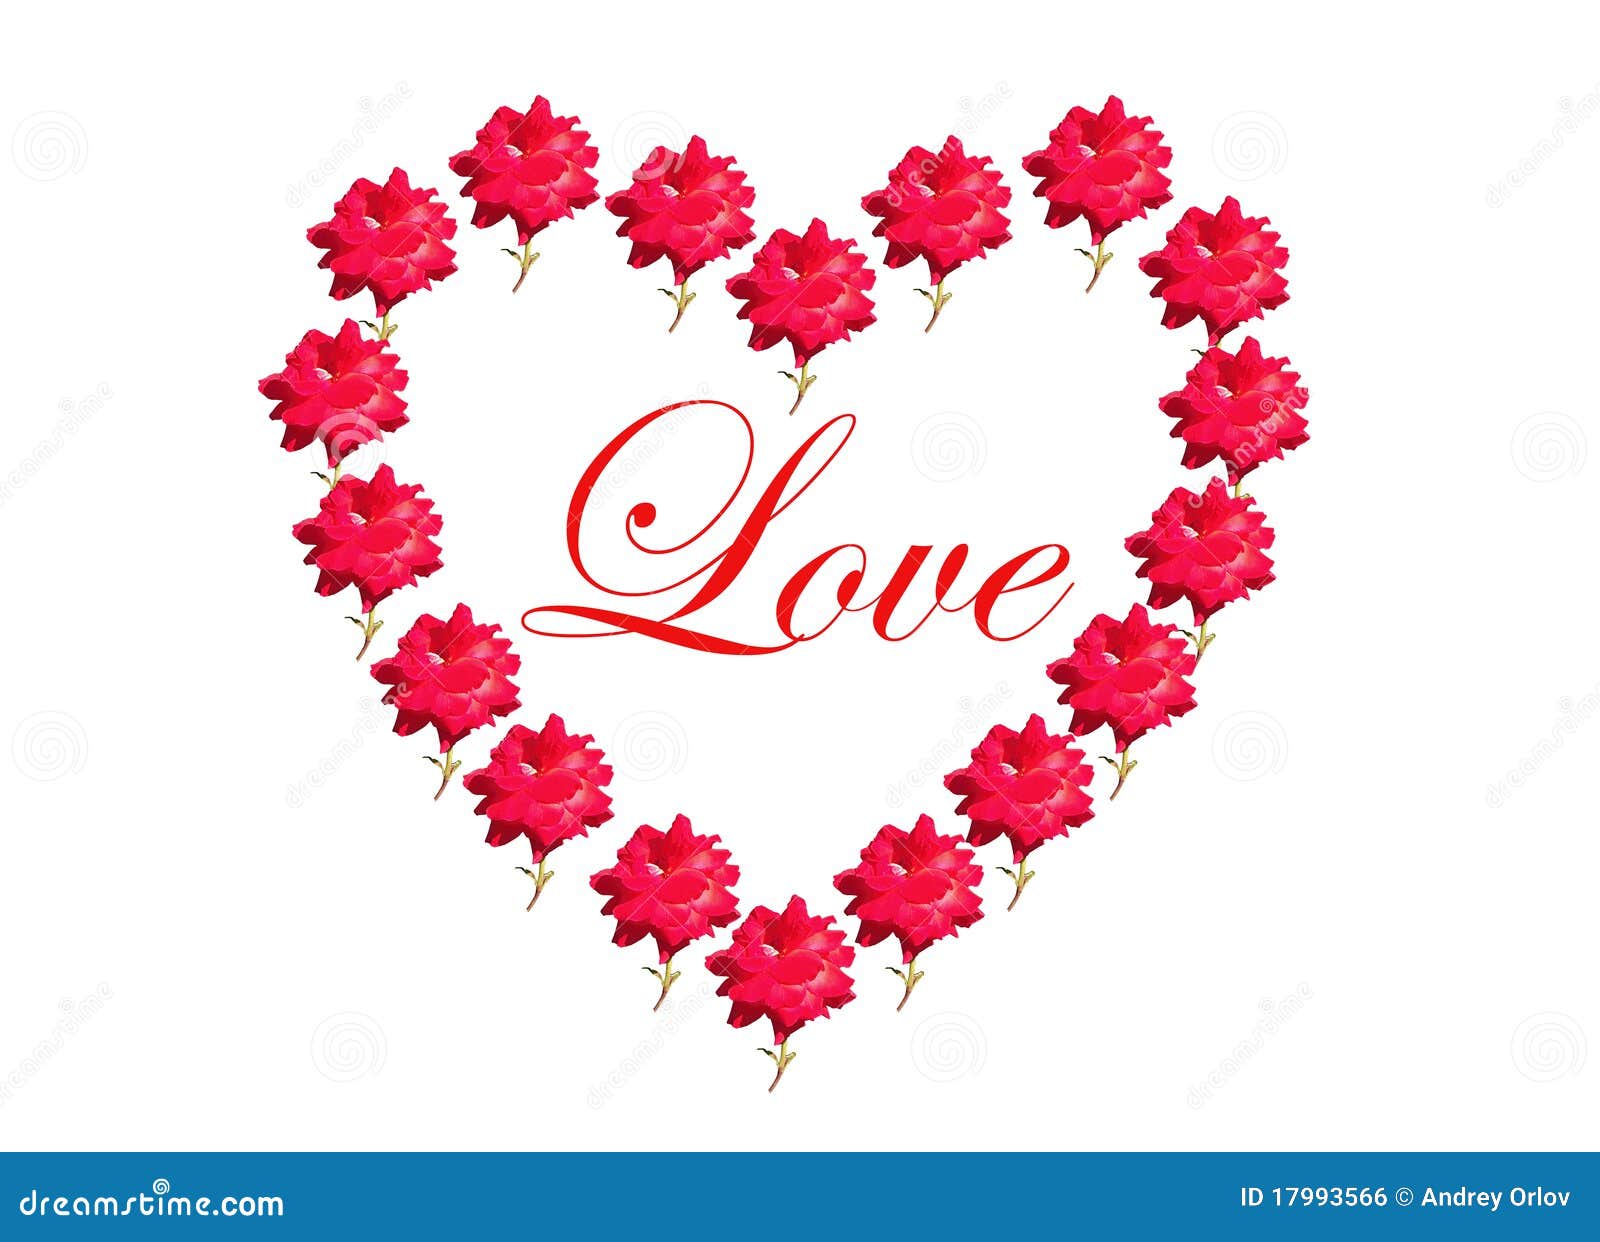 Valentines Day Roses In Shape Of Heart Royalty Free Stock Image ...